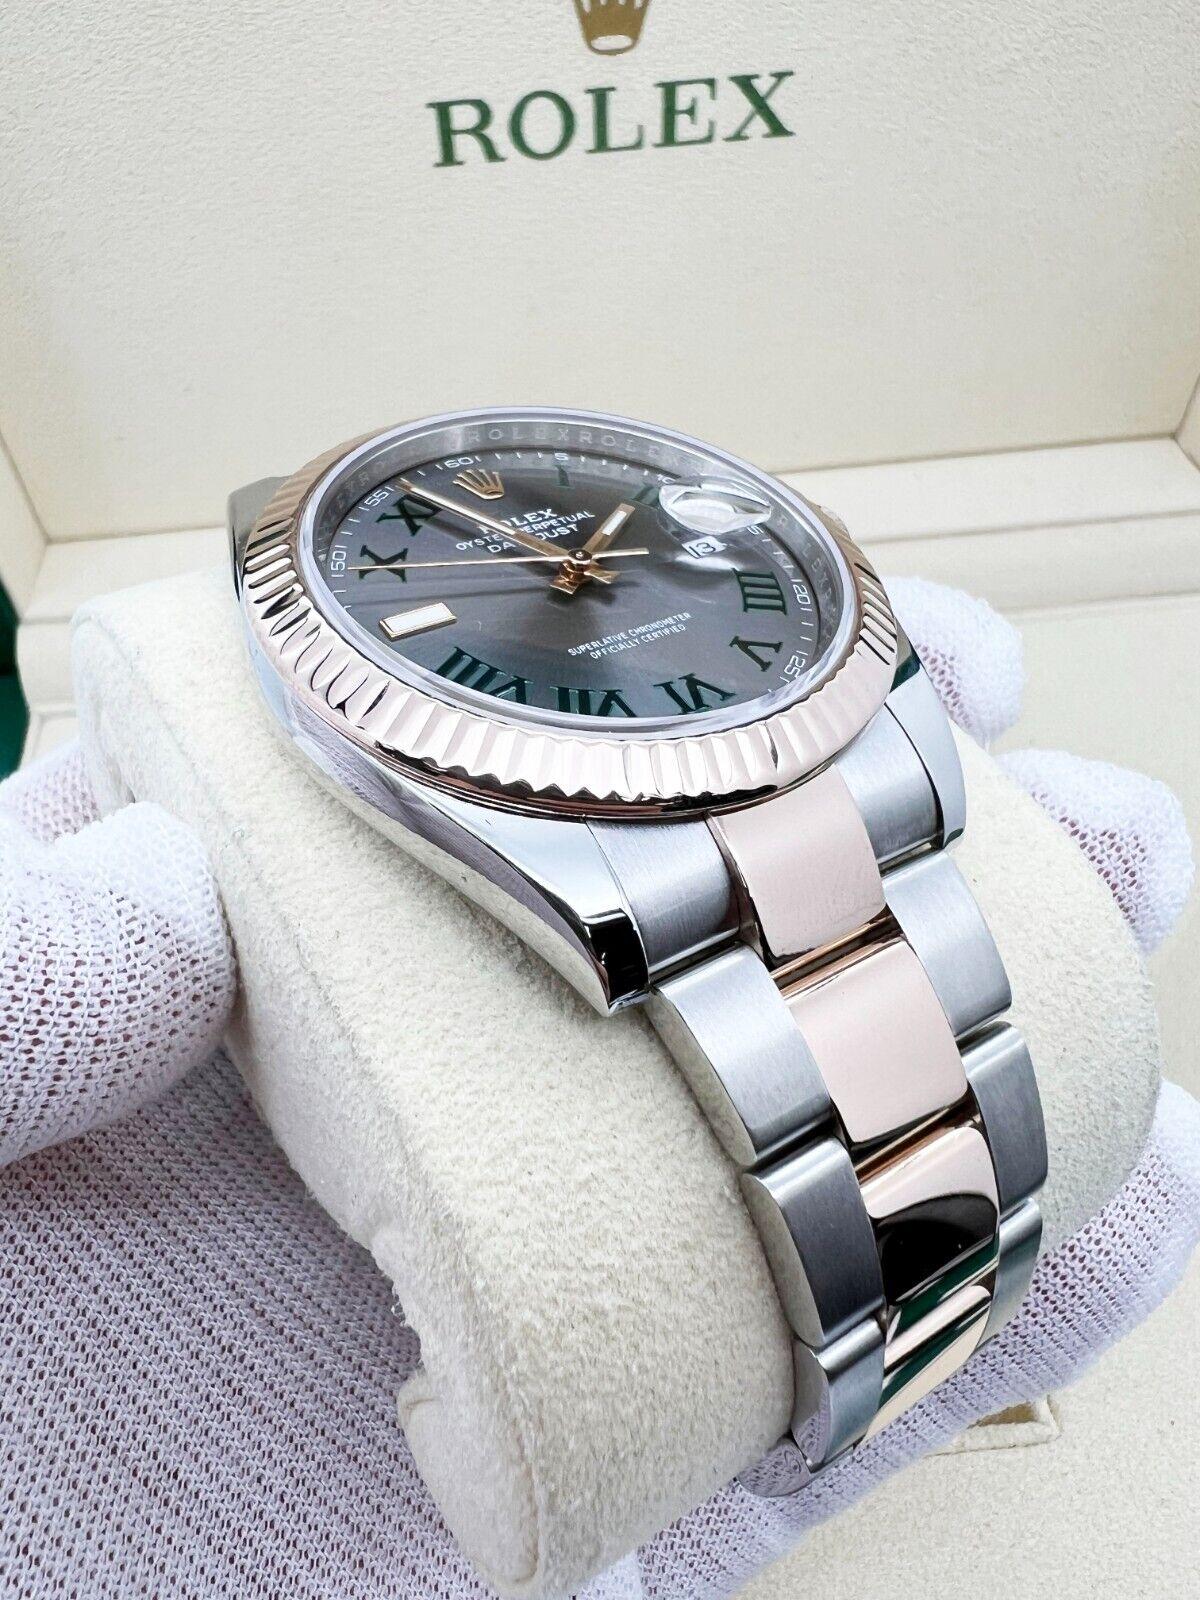 2020 Rolex 126331 Datejust 41 Wimbledon Dial 18K Rose Gold Steel Box Paper In Excellent Condition For Sale In San Diego, CA